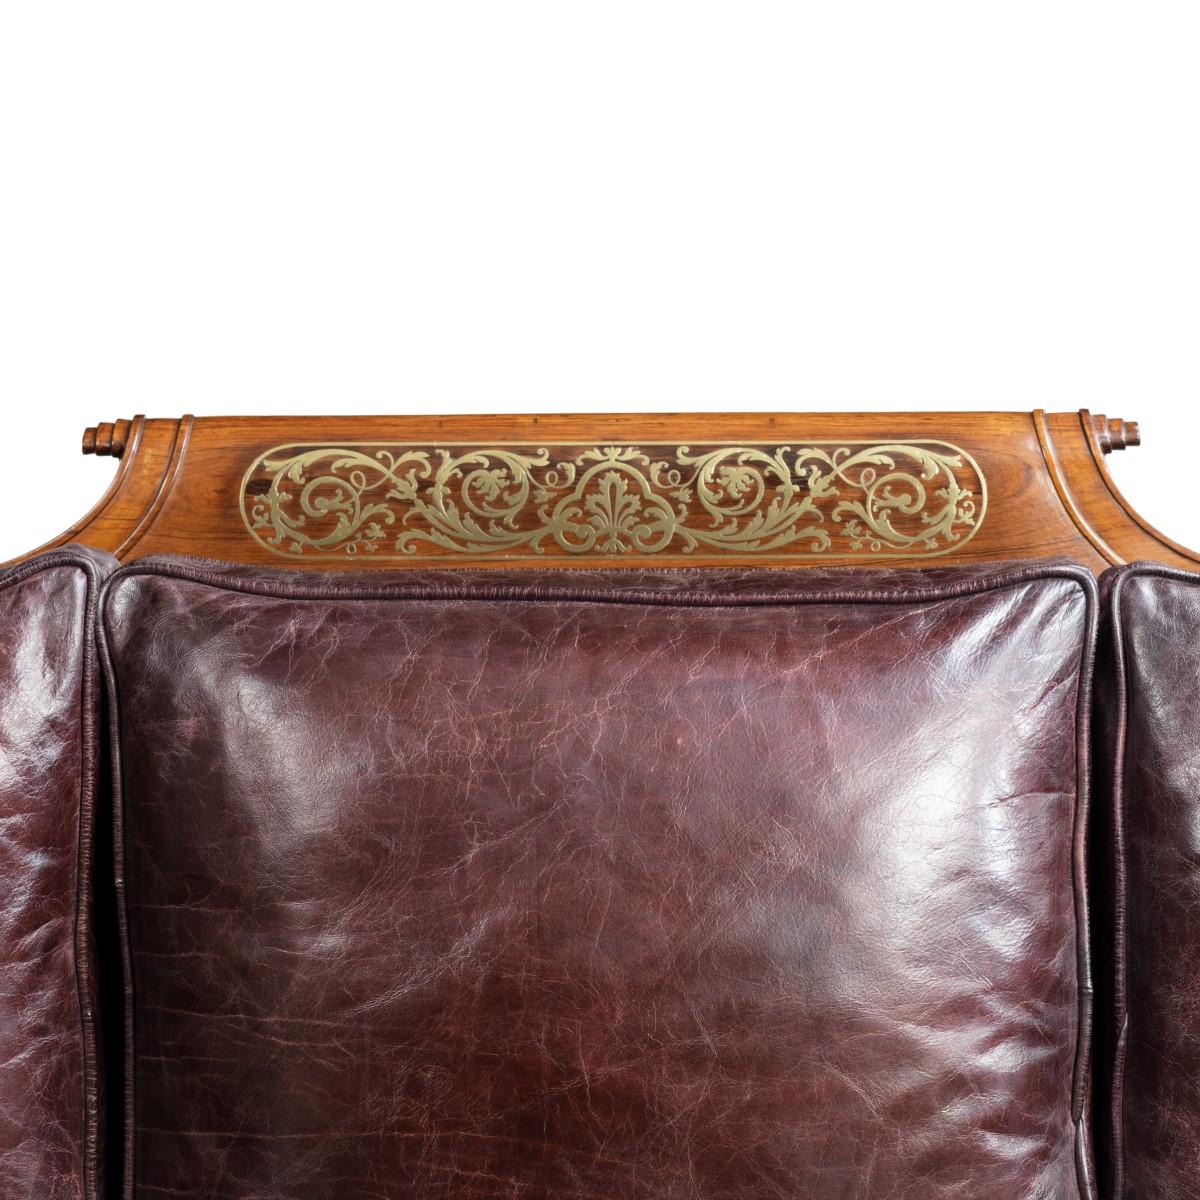 A George IV brass inlaid rosewood country house three-seat sofa attributed to Gillows, the serpentine back with a central panel and gadrooned terminals at either end, the carved scrolling arms continuous with the panelled seat rail, decorated with